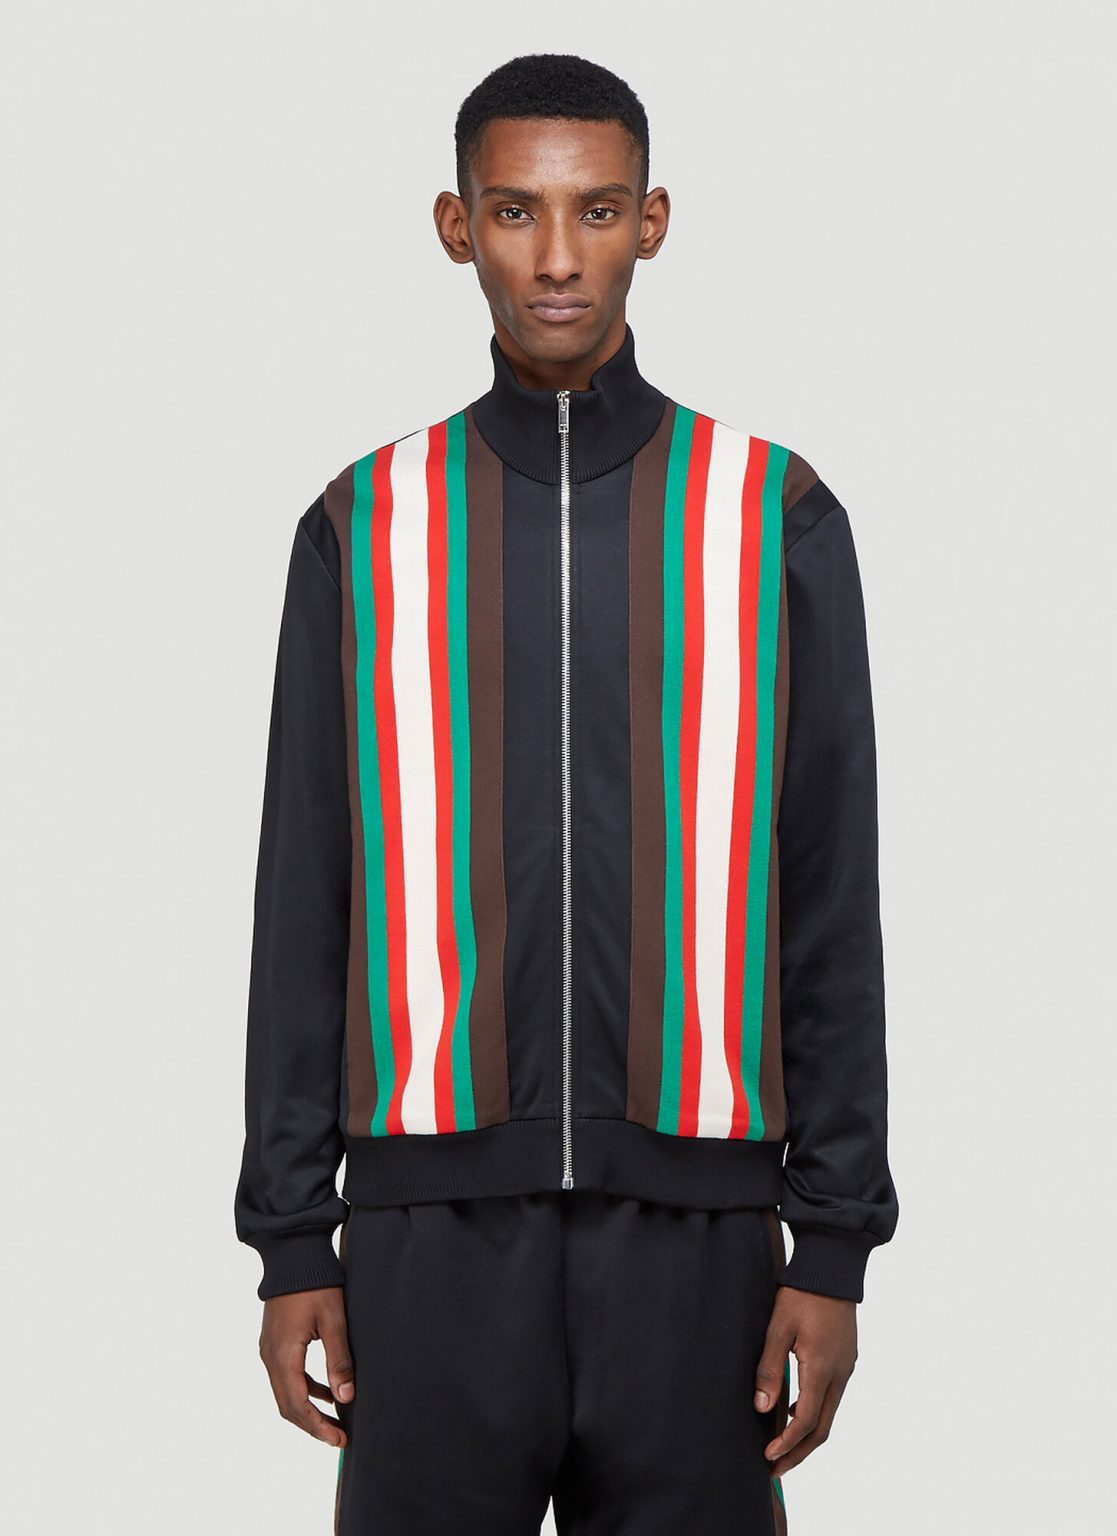 Gucci Contrast-Panel Track Jacket in Black size XS | The Fashionisto